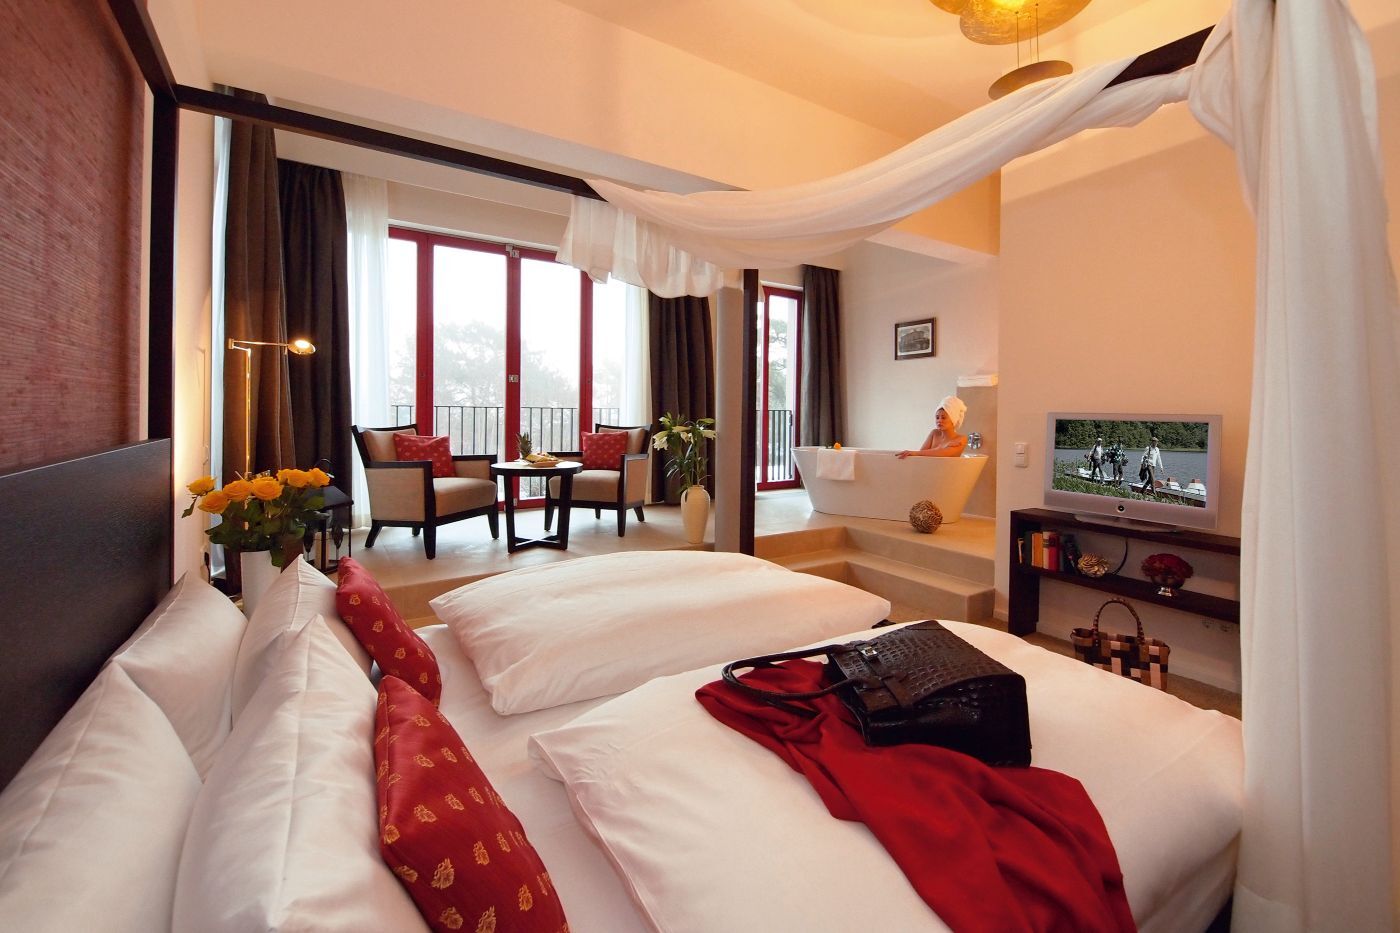 view into the room, sleeping area with canopy bed, sleeping area, room view, time out, vacation, relaxation, book here!